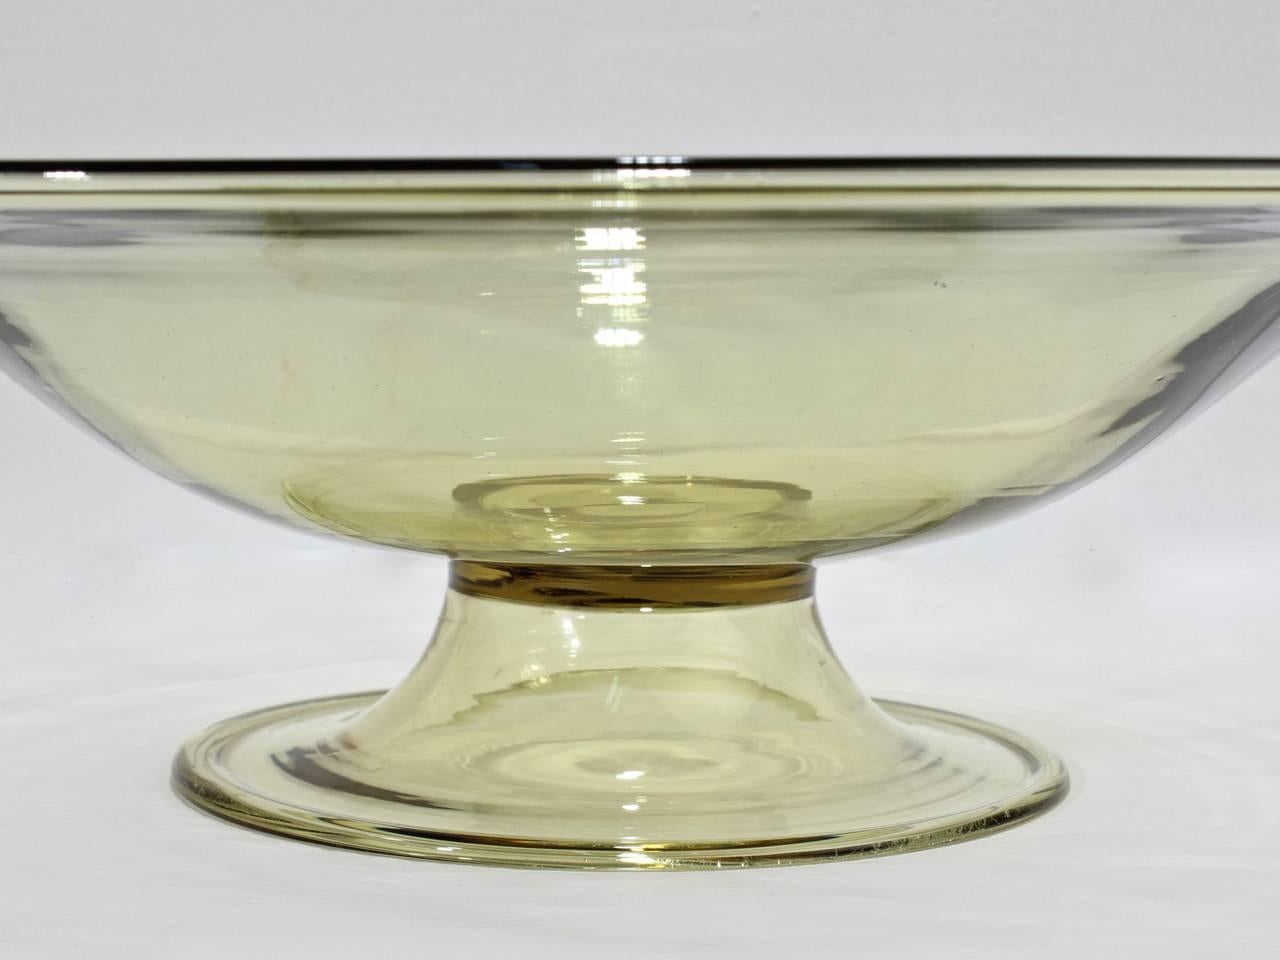 20th Century Large Venetian Midcentury Glass Footed Bowl Centrepiece Attributed to Salviati